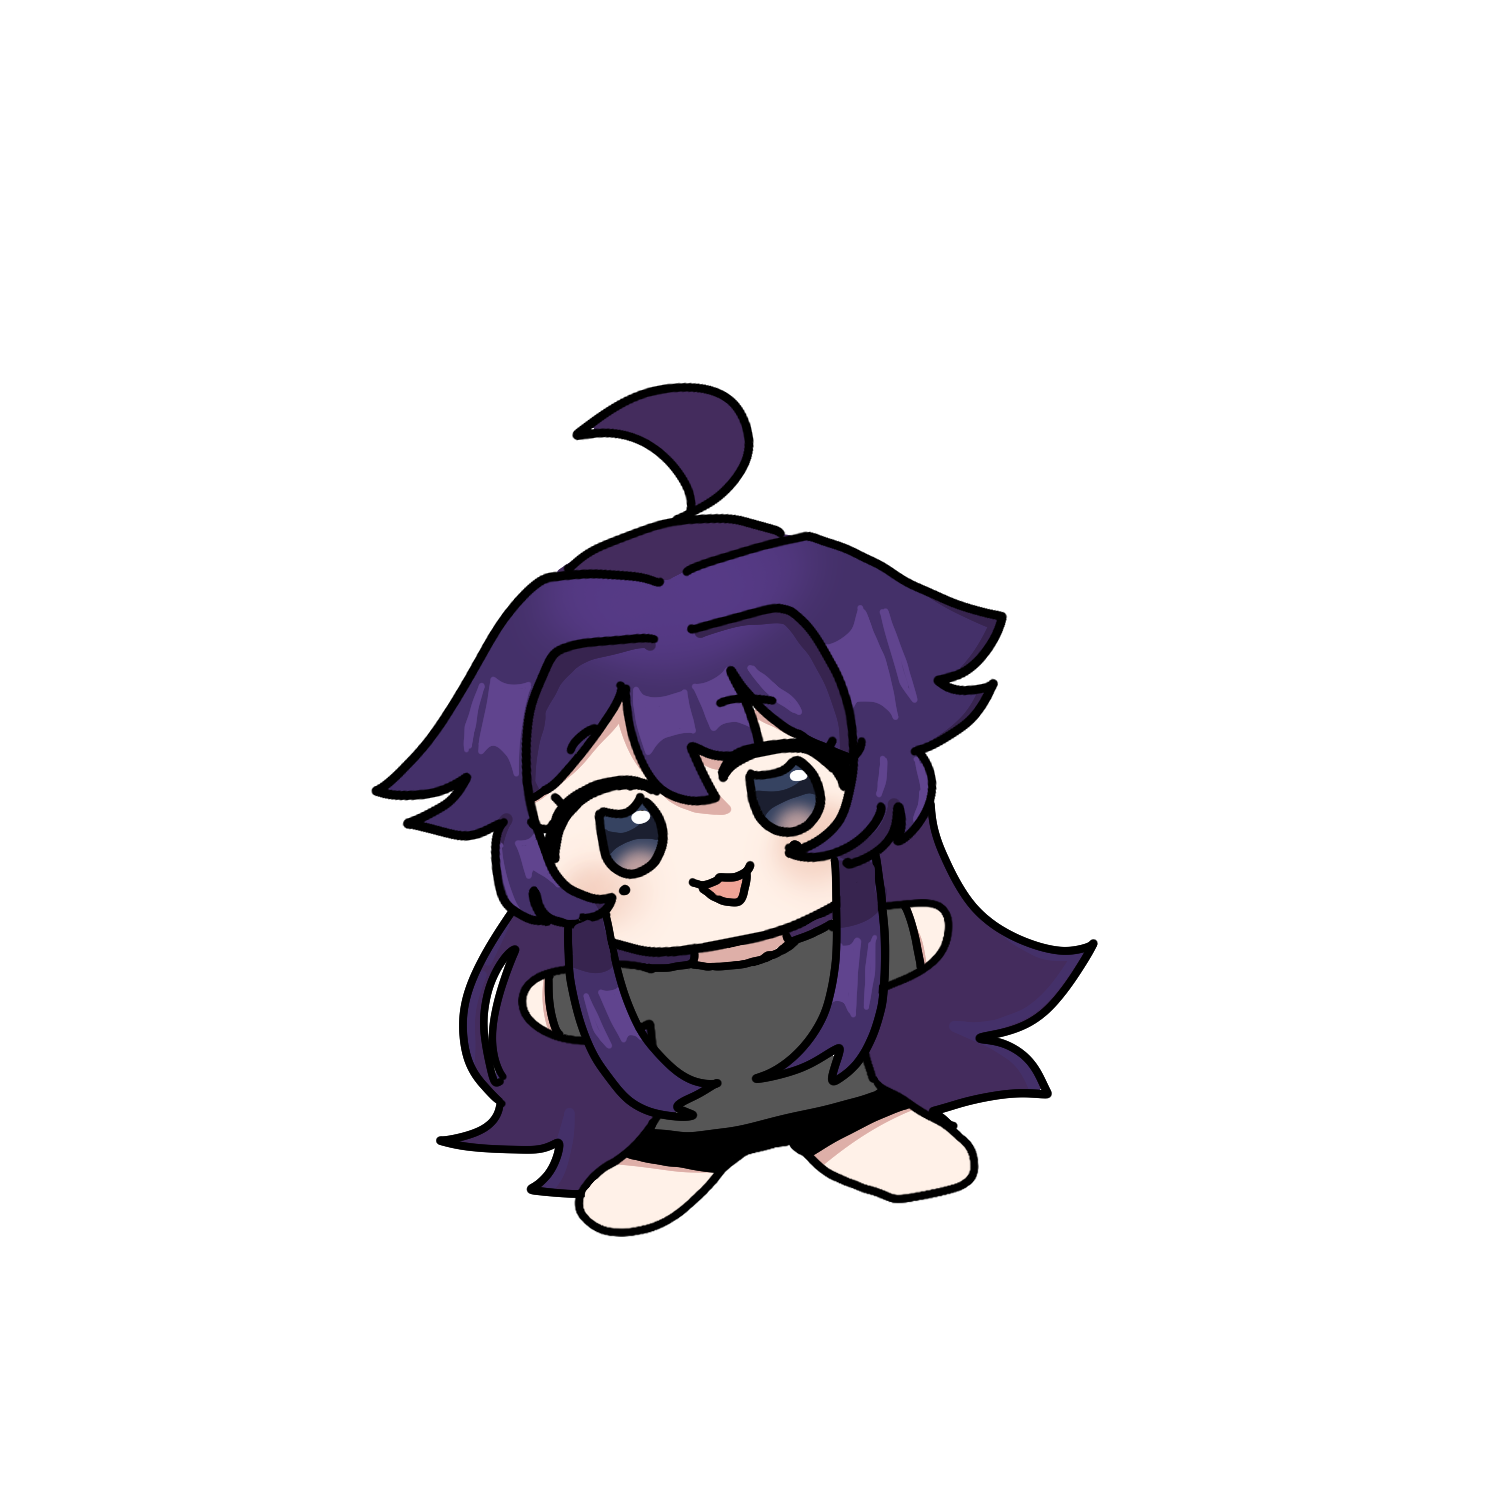 okuda as a little creature. a small illustration of a girl with purple hair.